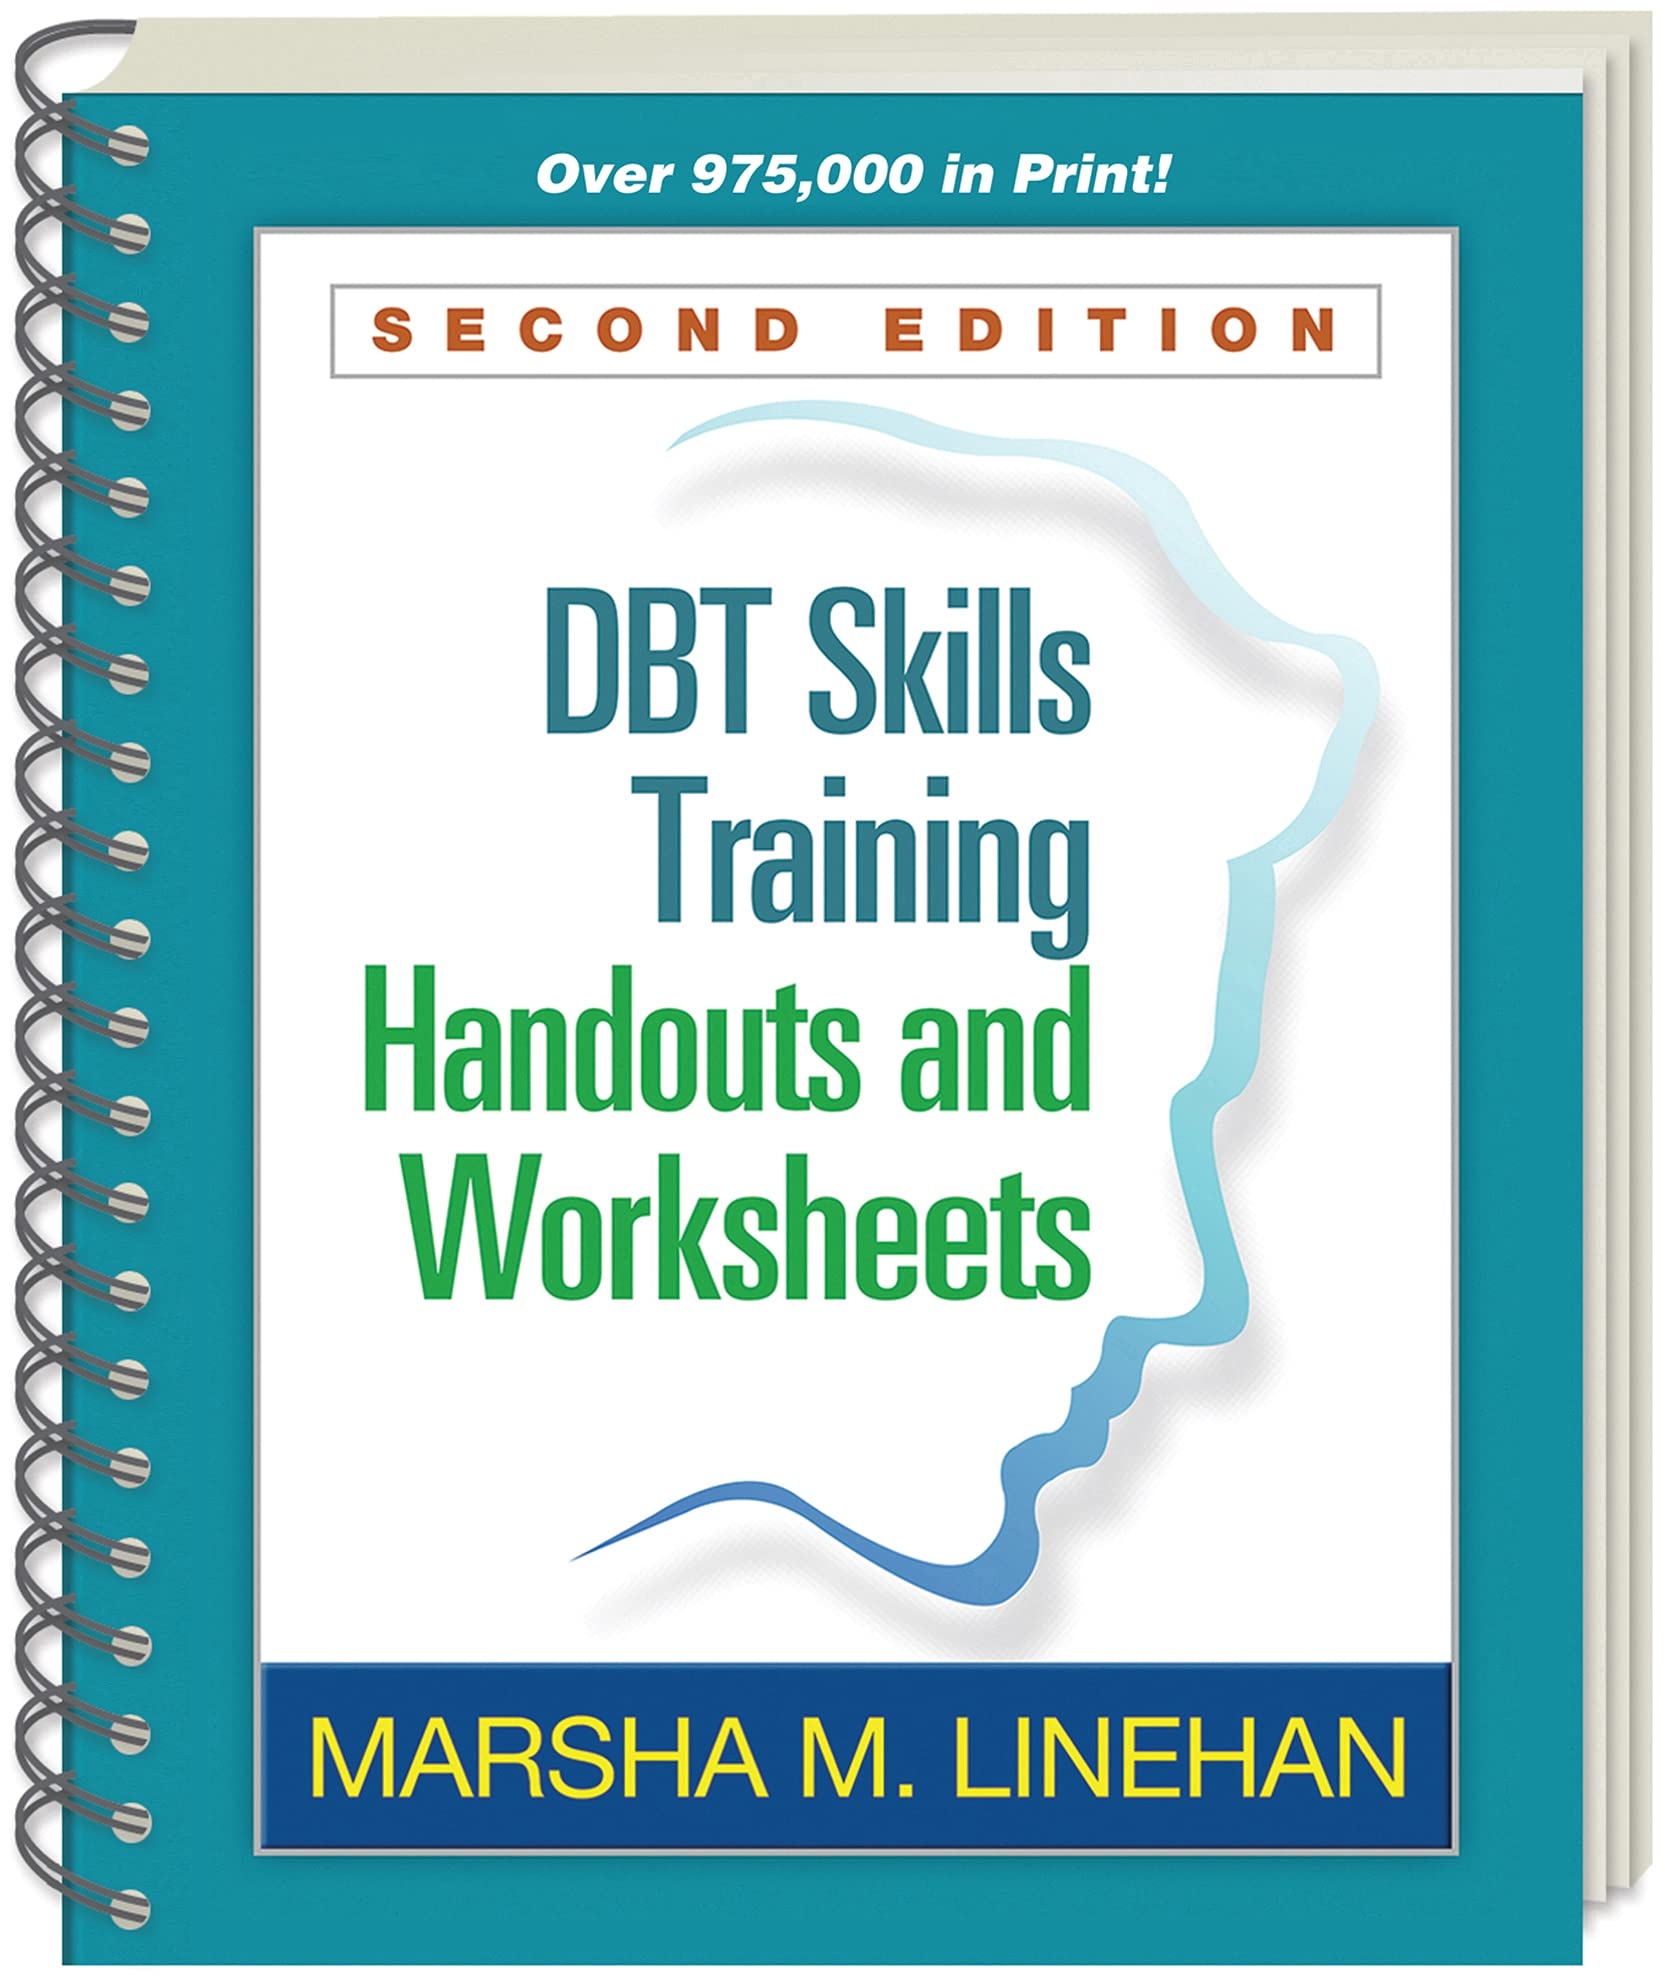 DBT Skills Training Handouts And Worksheets 2nd Edition